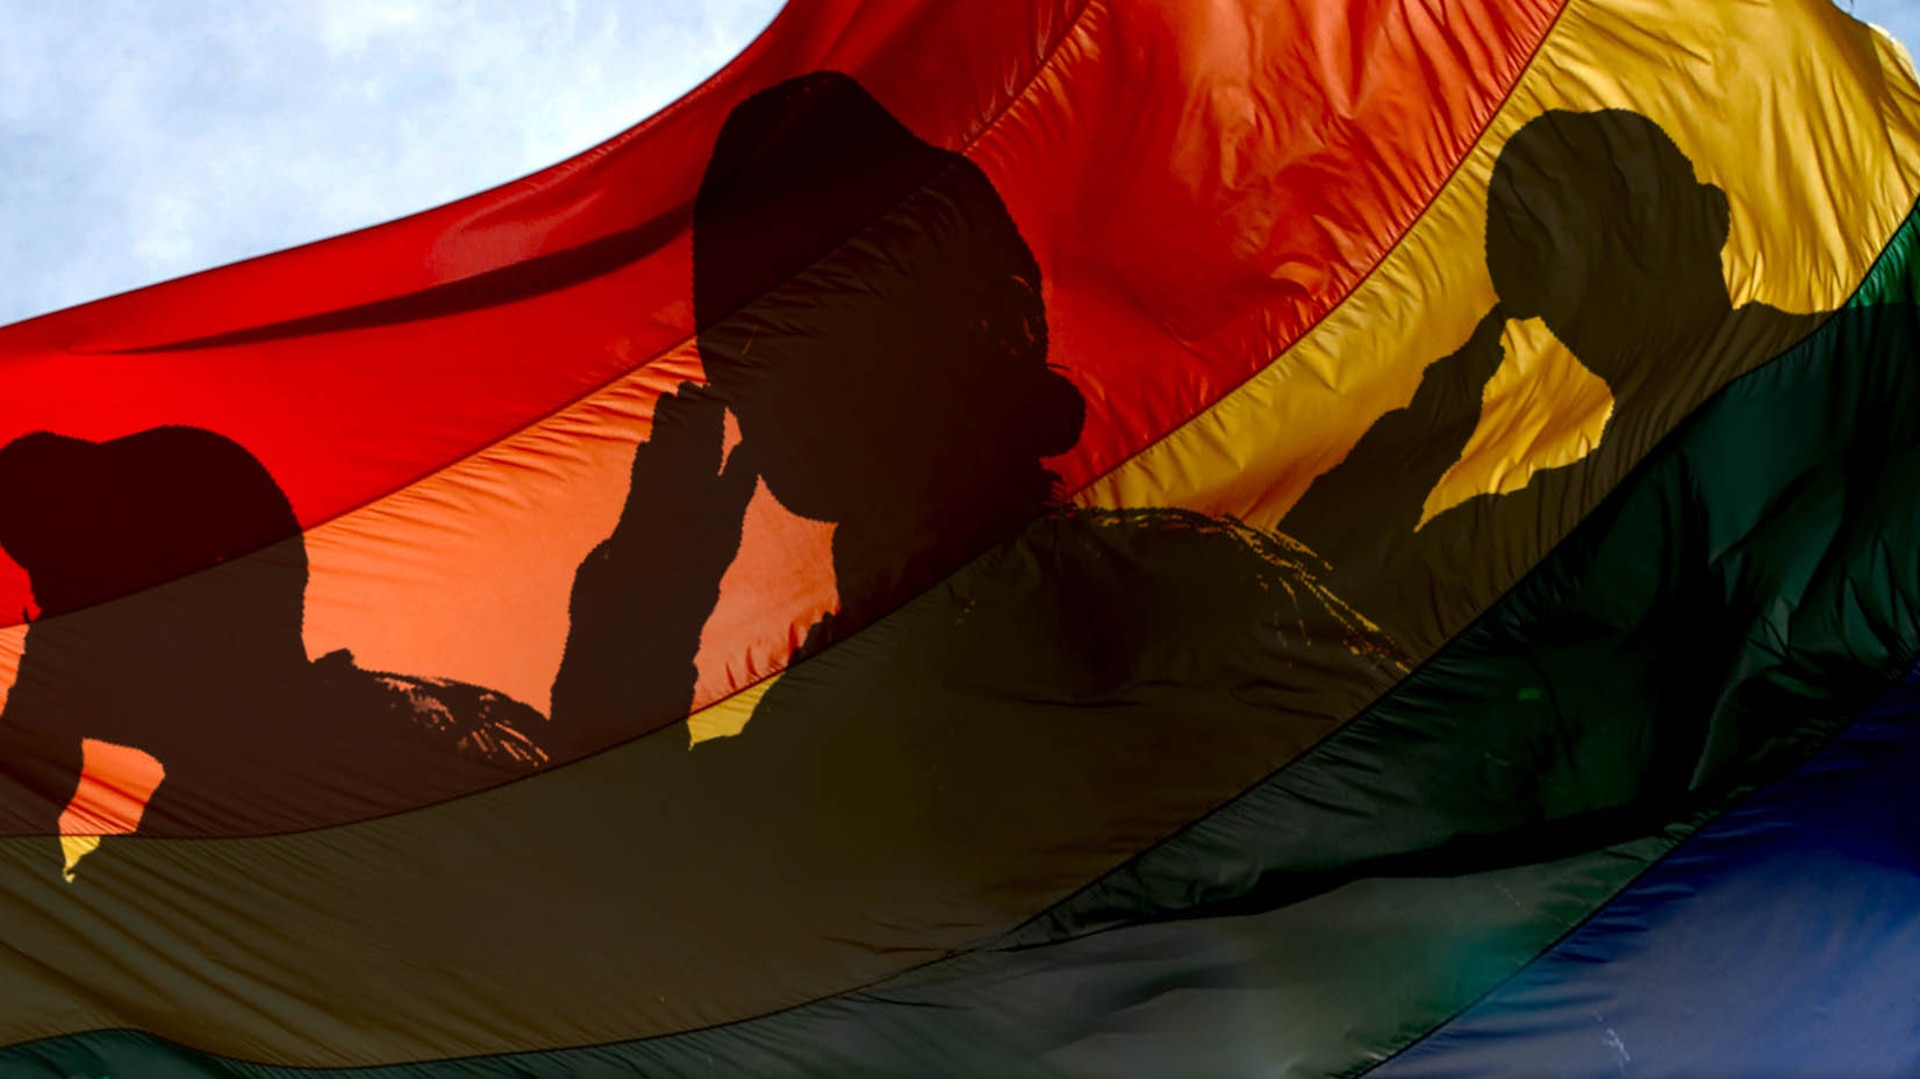 A graphic with servicemember silhouettes saluting over an LGBTQ+ flag.